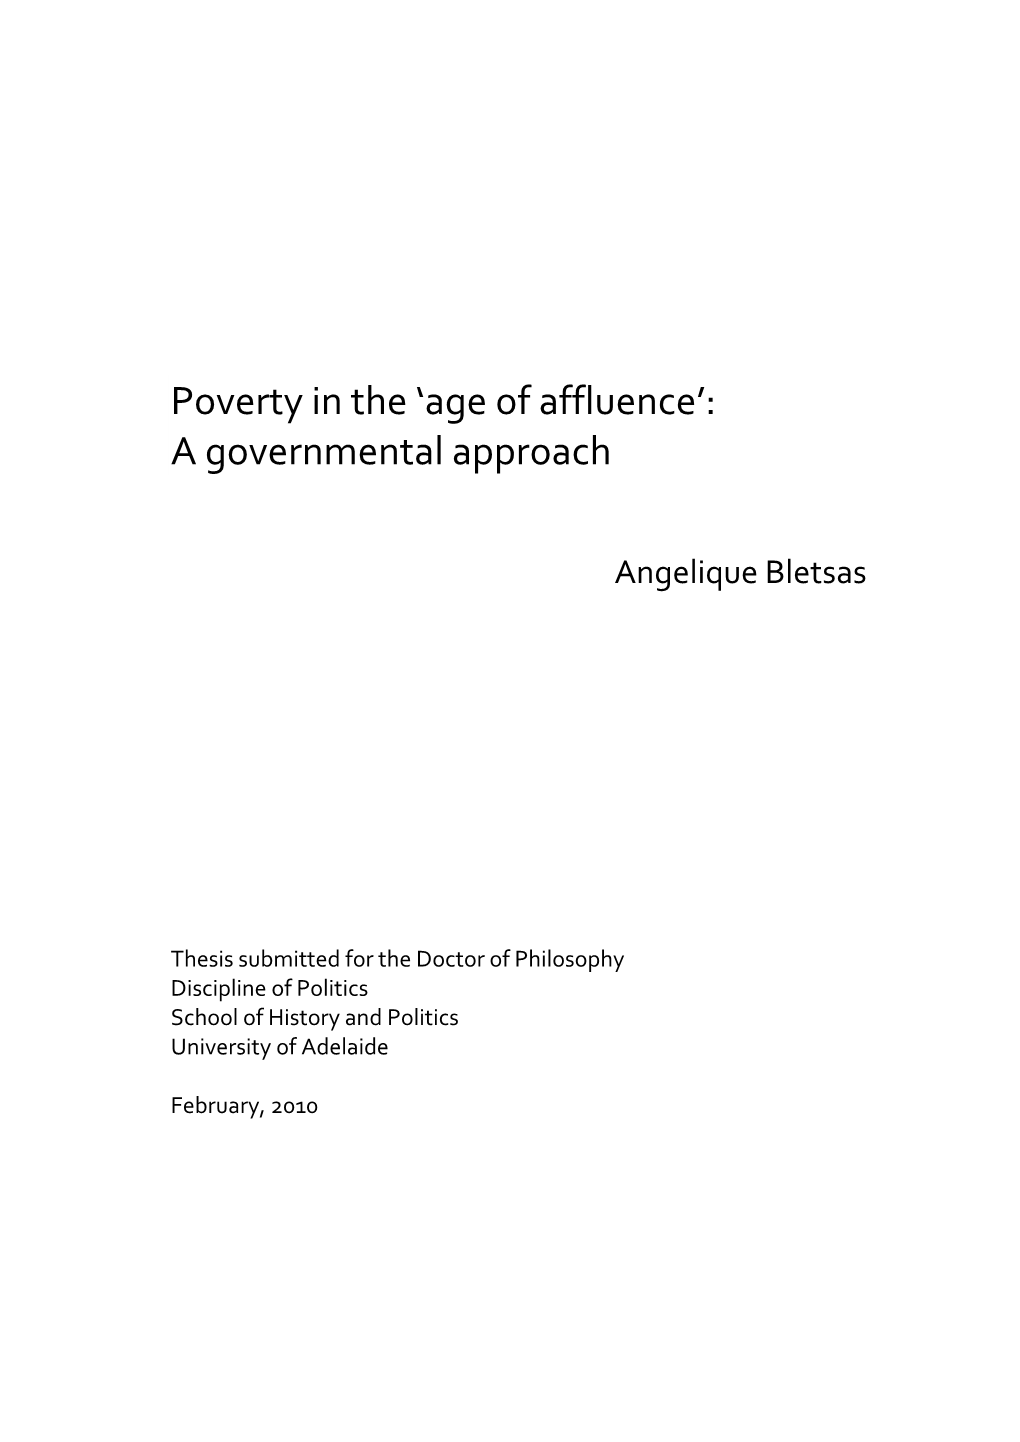 Poverty in the 'Age of Affluence': a Governmental Approach